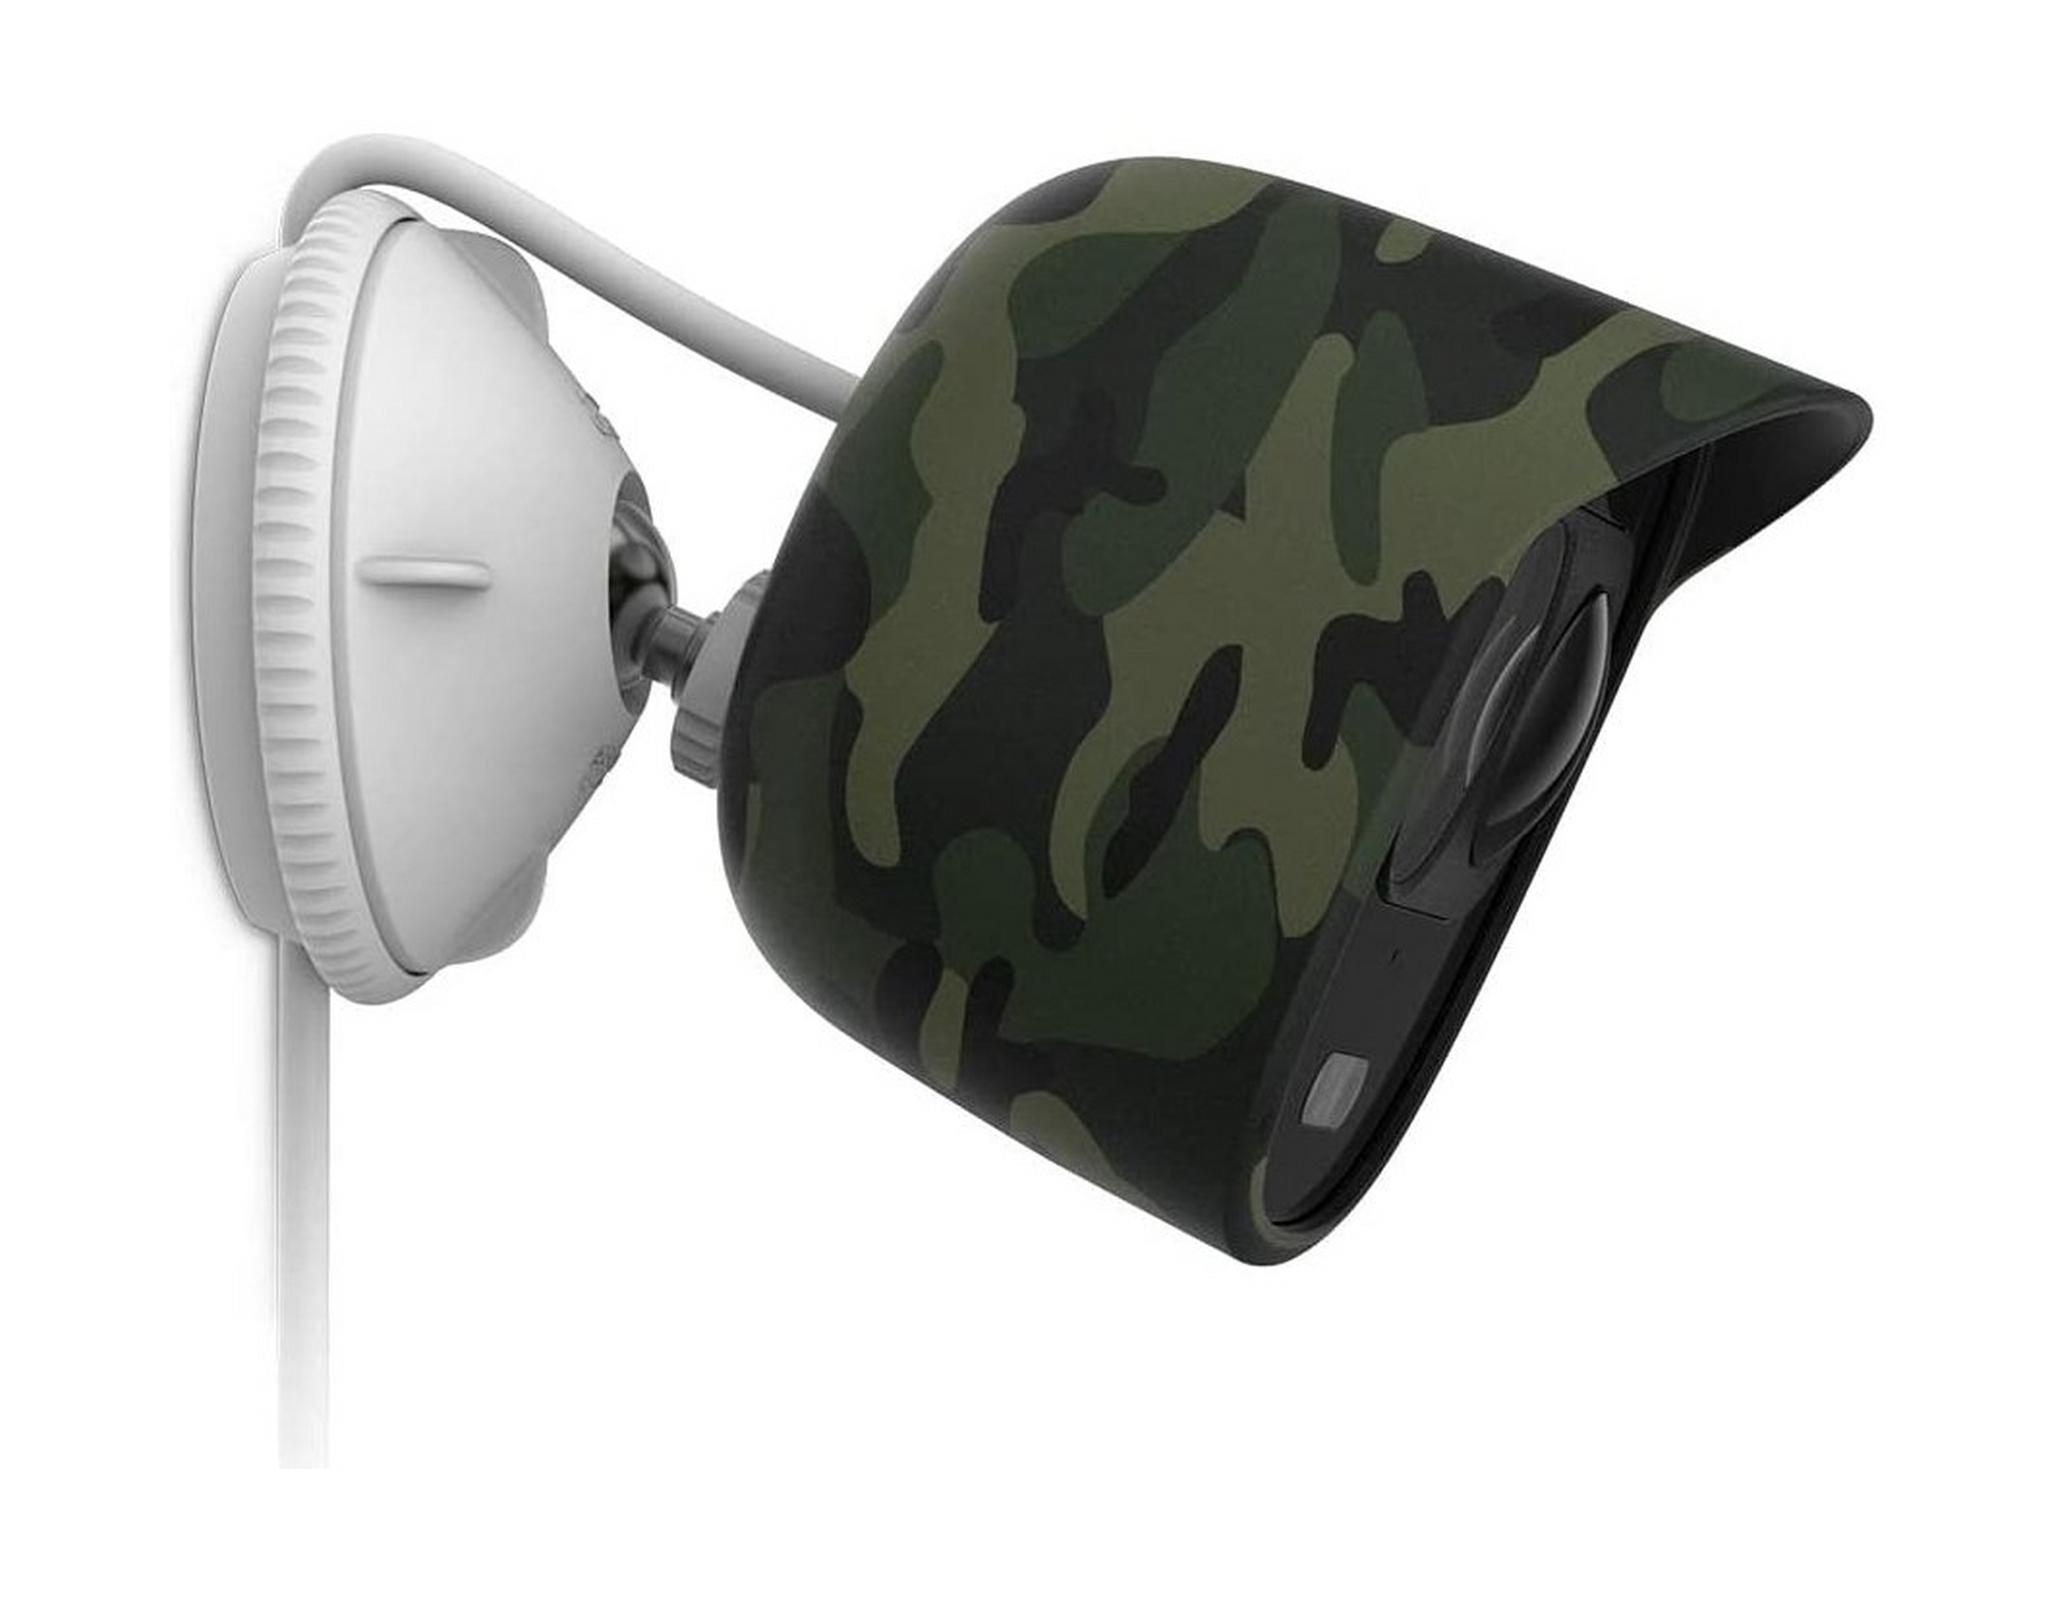 IMOU Looc CCTV Silicone Cover - Camouflage